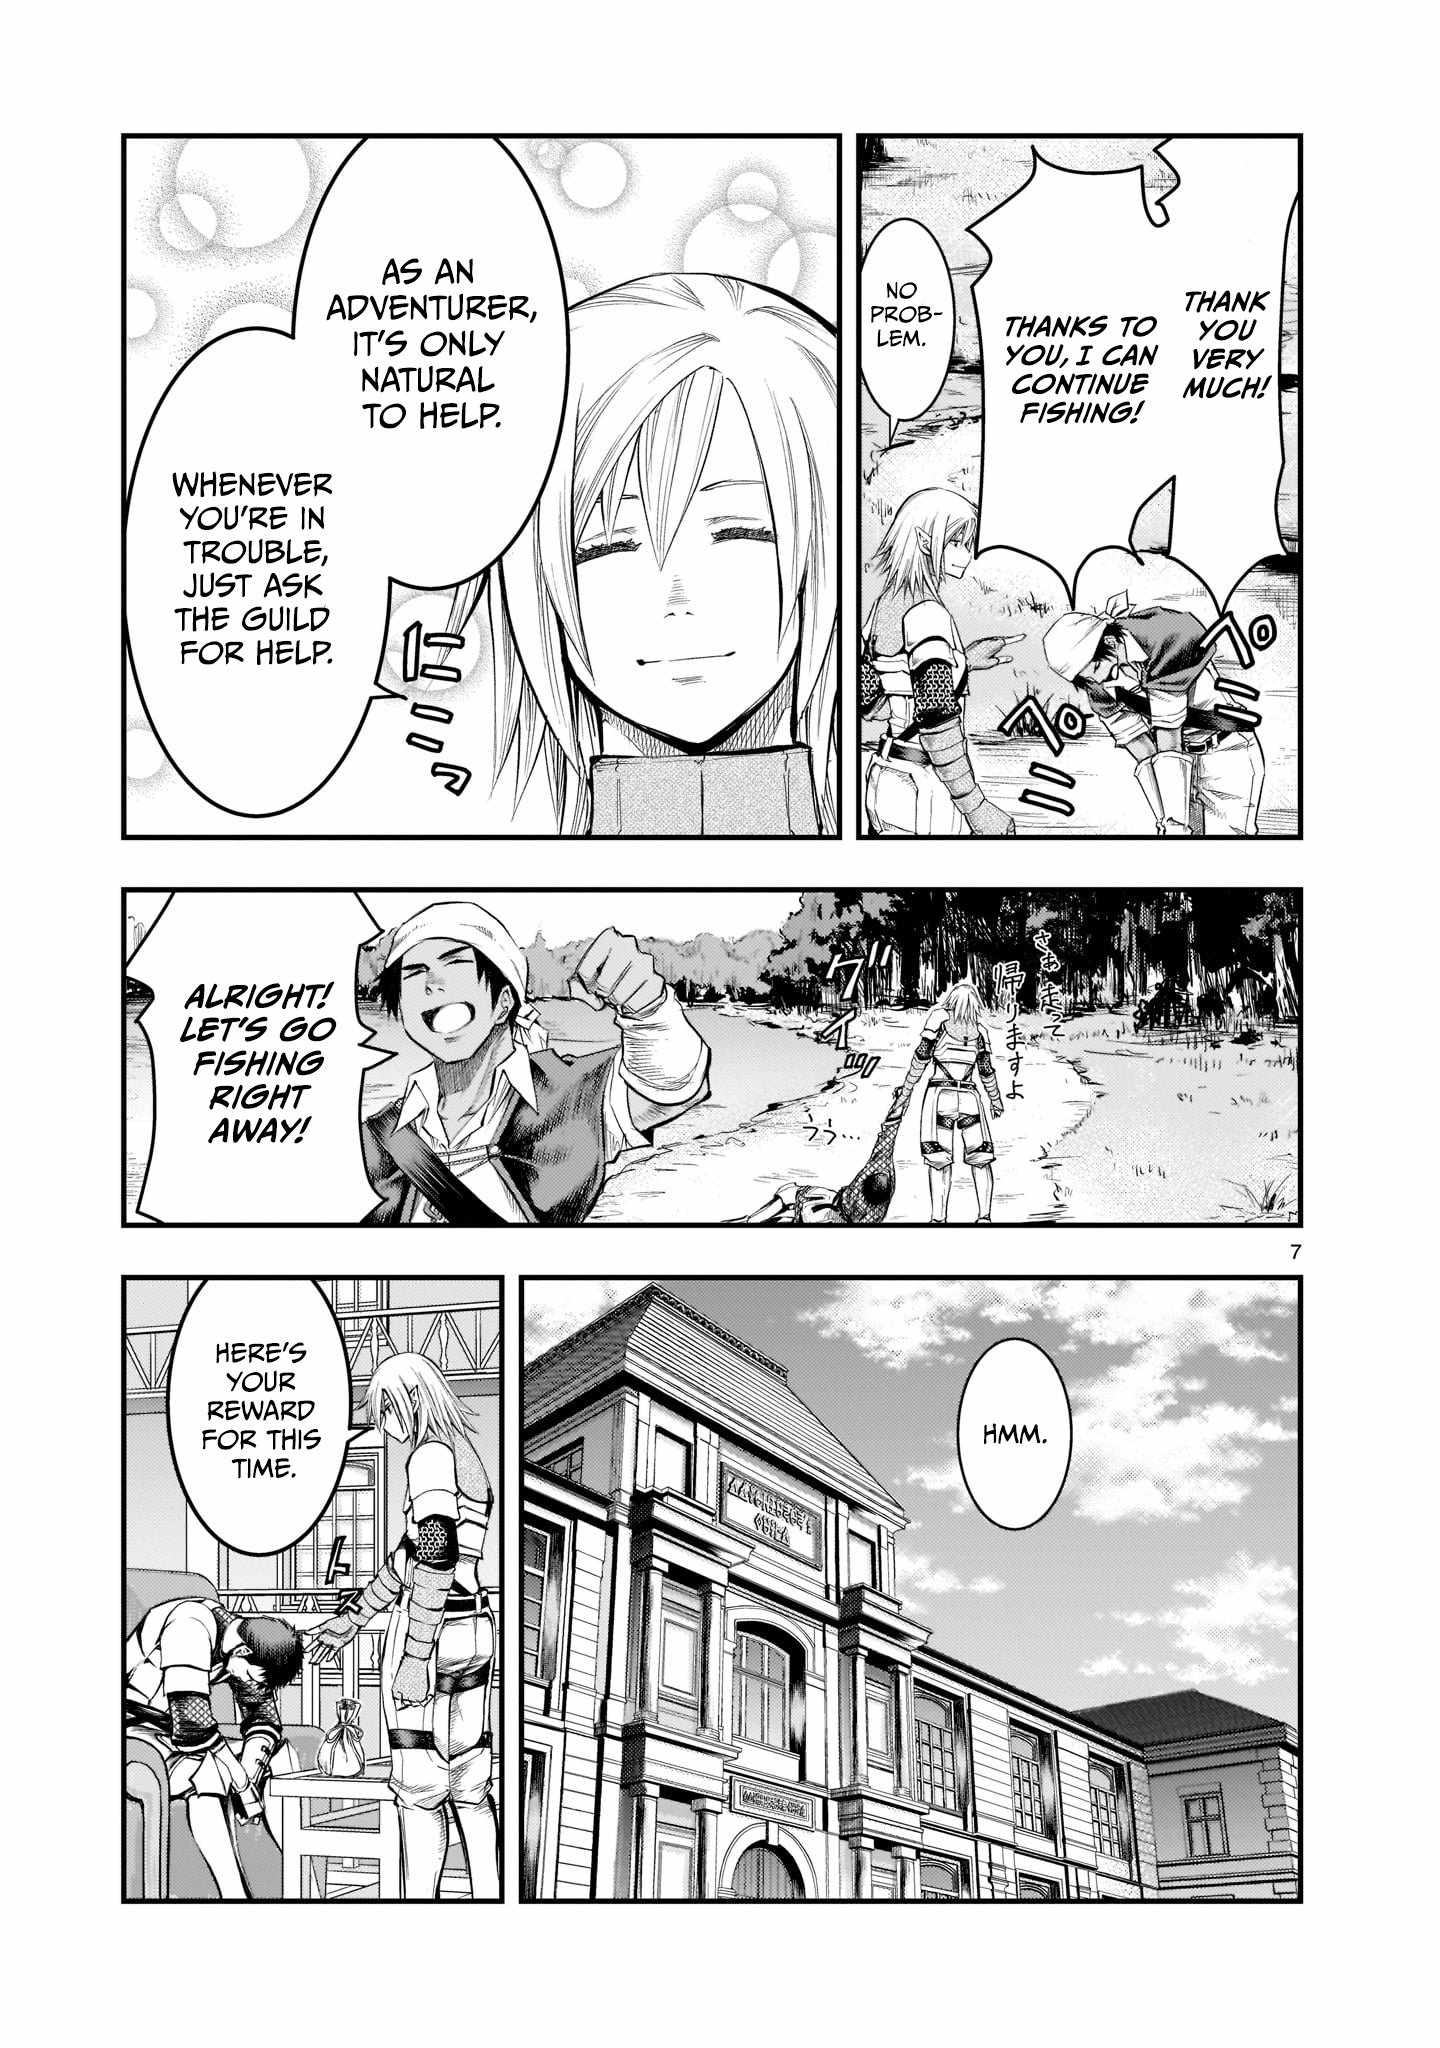 Re-Employment of the Former Strongest Hero Chapter 2